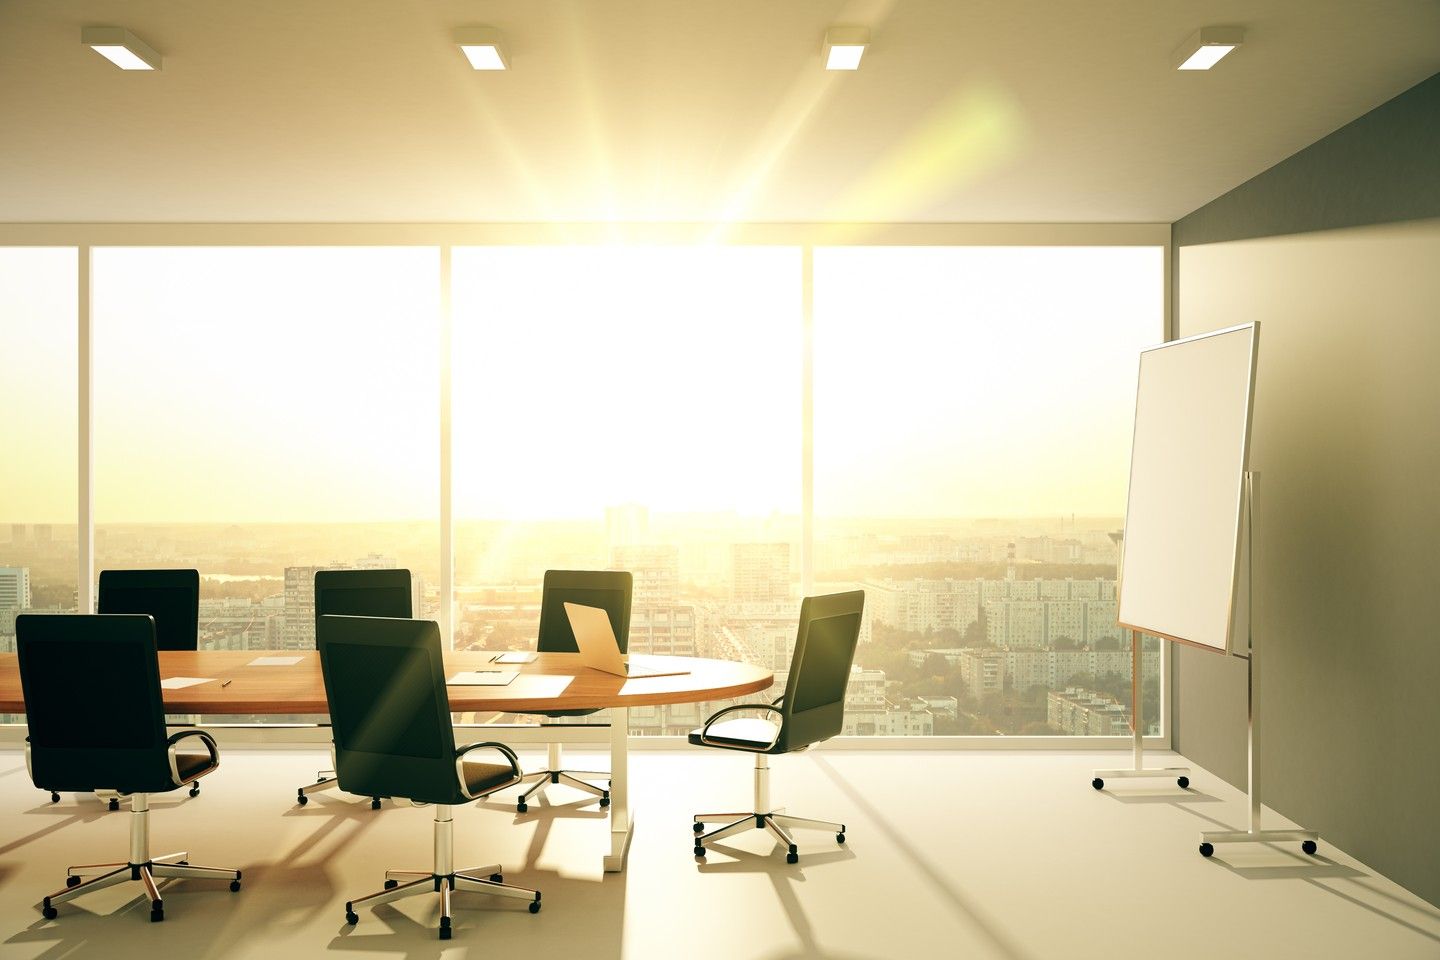 Sales teams need natural light to thrive, and lots of it!